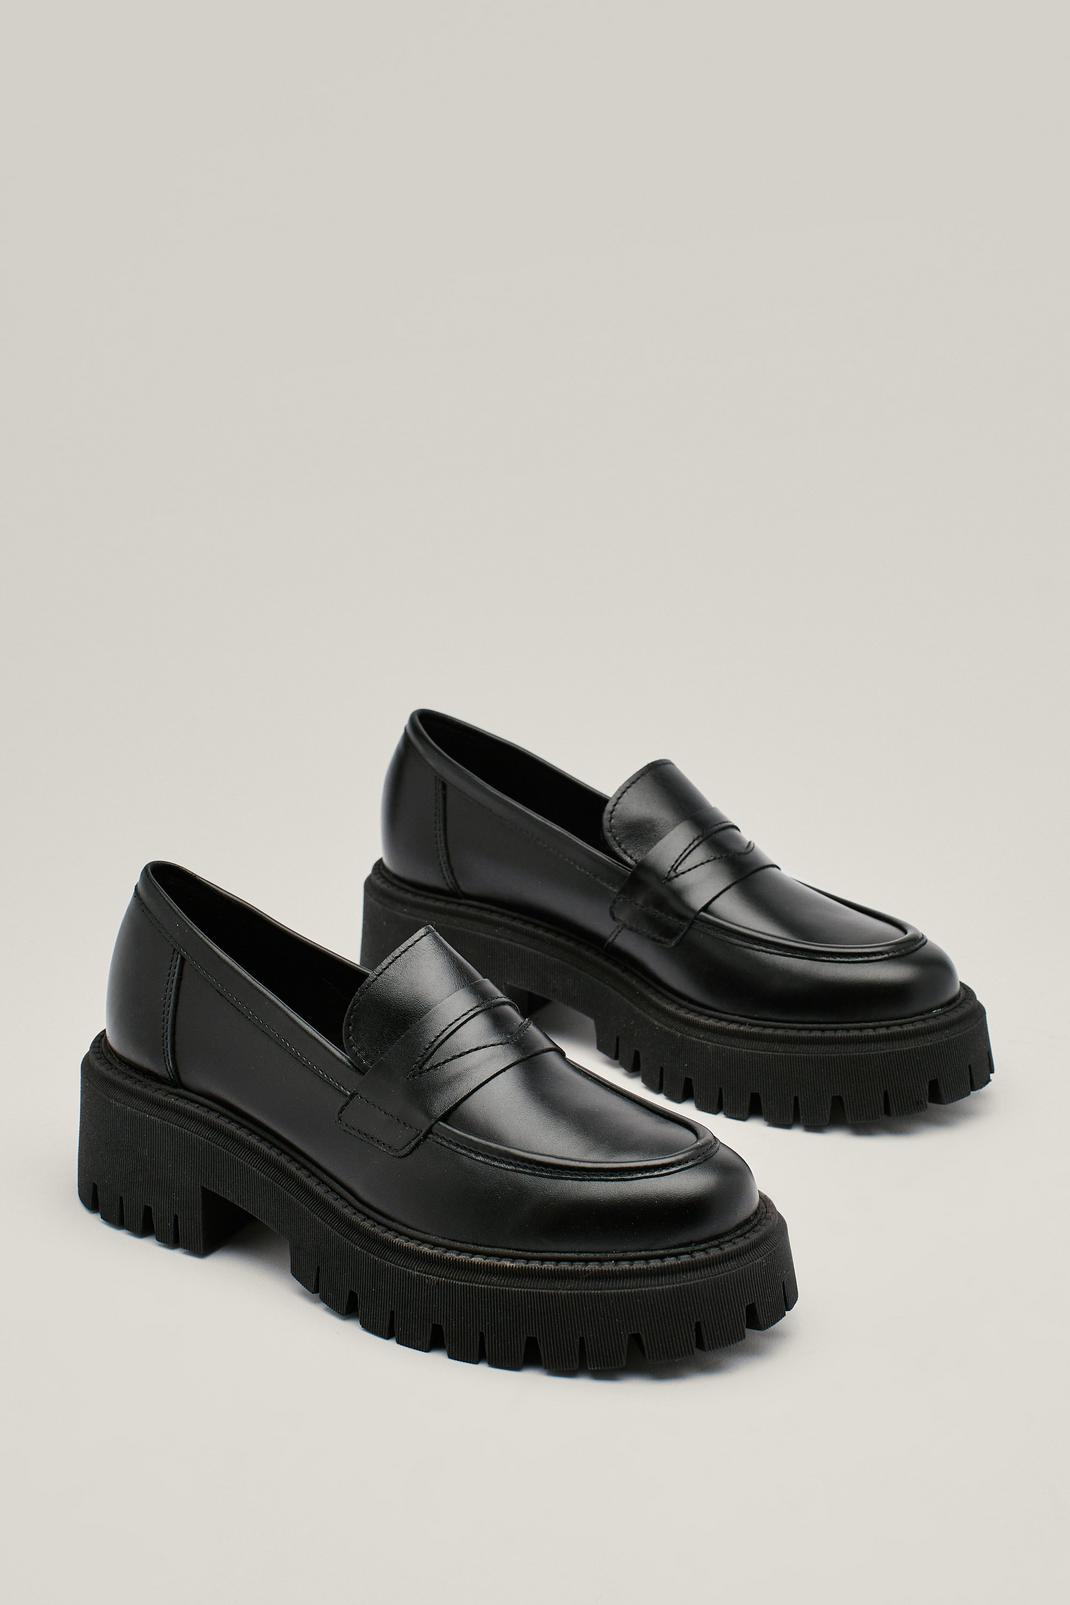 Black Chunky Penny Loafers CHARLES KEITH CZ, 54% OFF